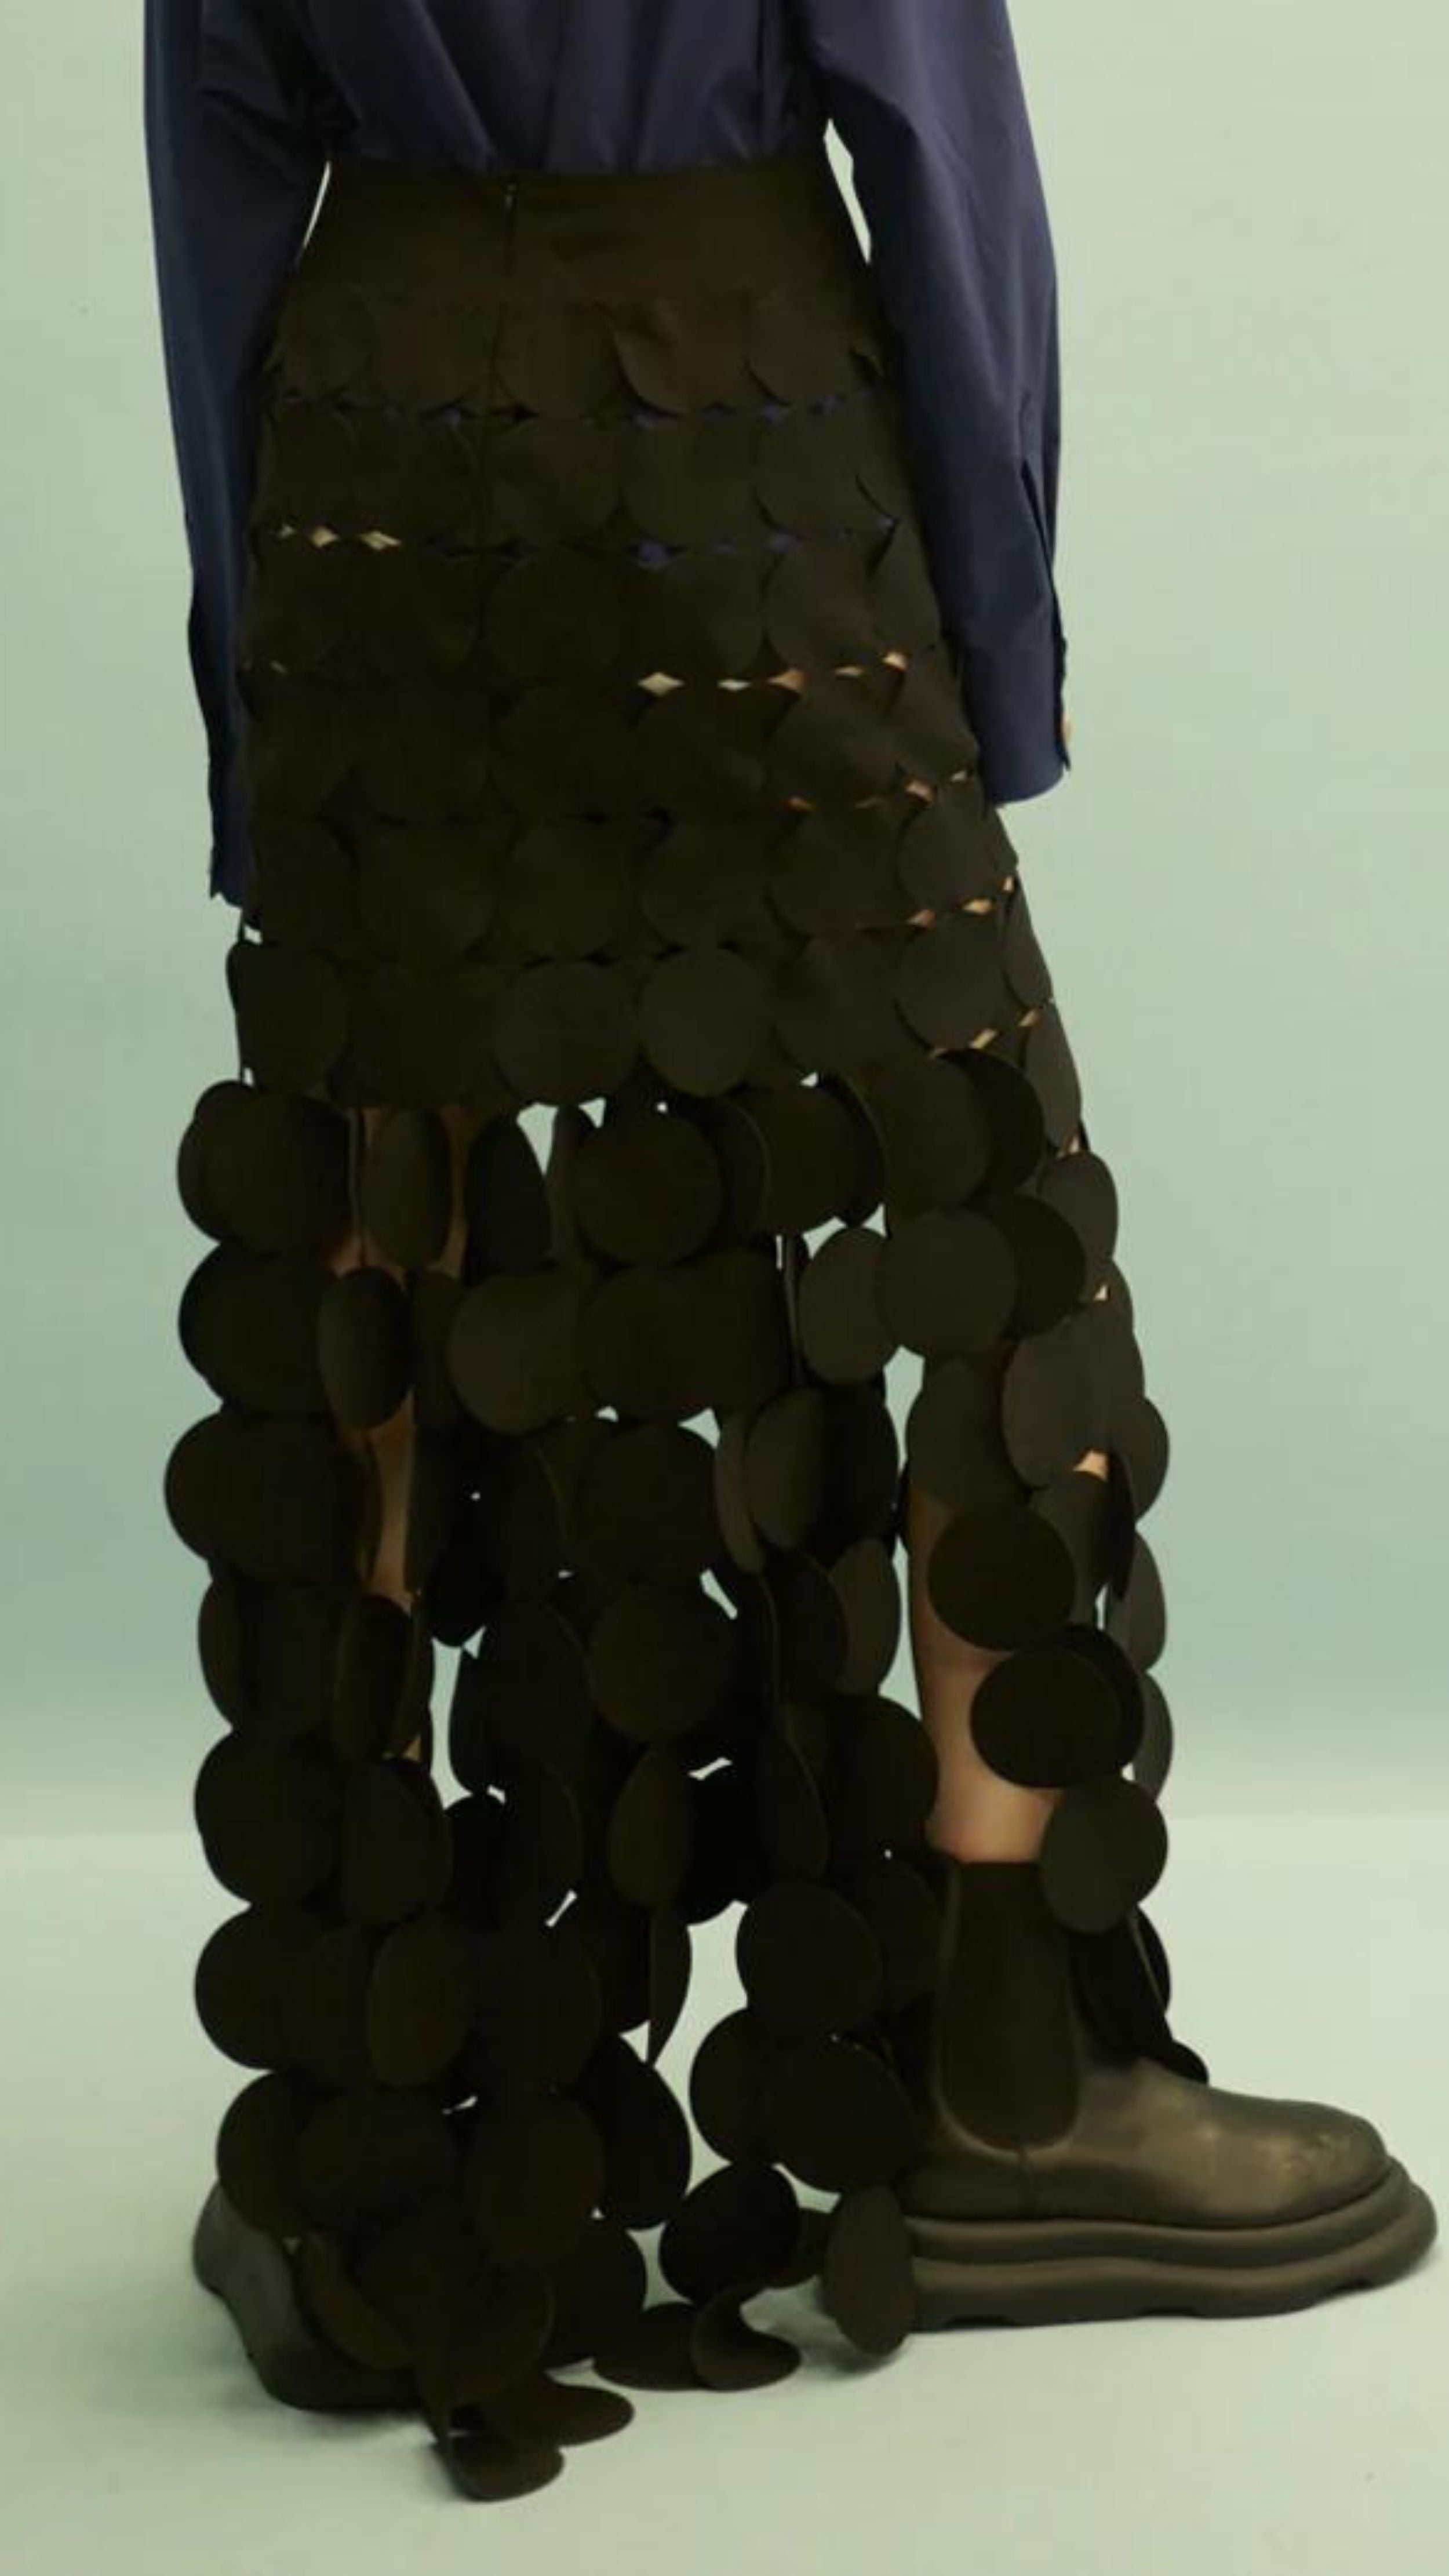 AWAKE Mode Laser Cut Multi Circle Double Layer Skirt. Icon AWAKE Mode circle skirt with a double layer to cover the right areas. With an elastic waist and the circle layers midi to maxi length. Shown on a model close up facing back